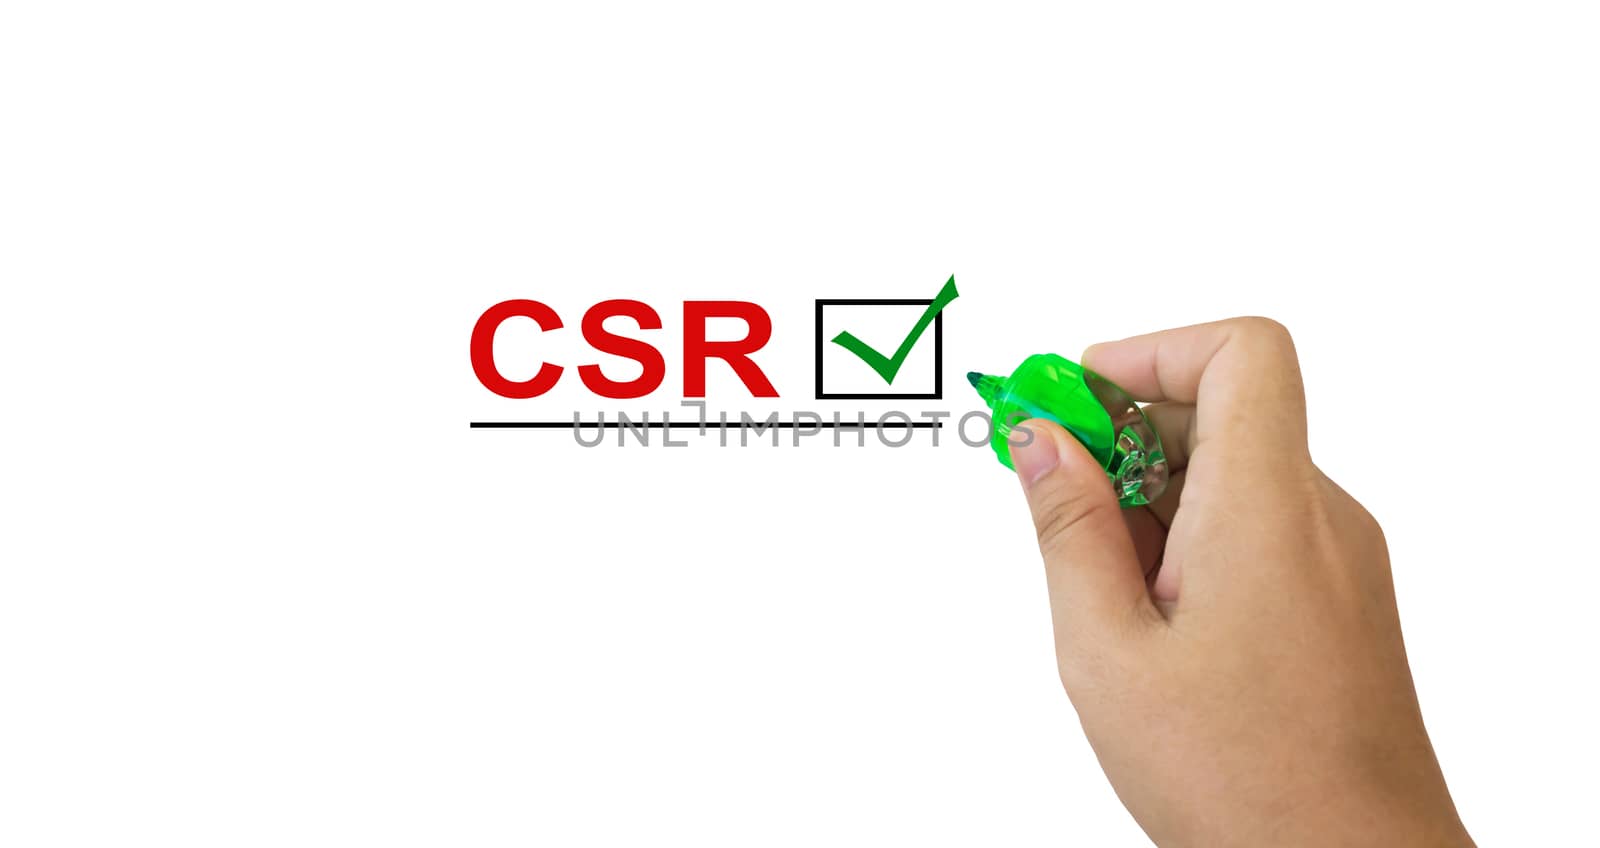 Text CSR in red colour with isolated hand and marker pen writing on white background